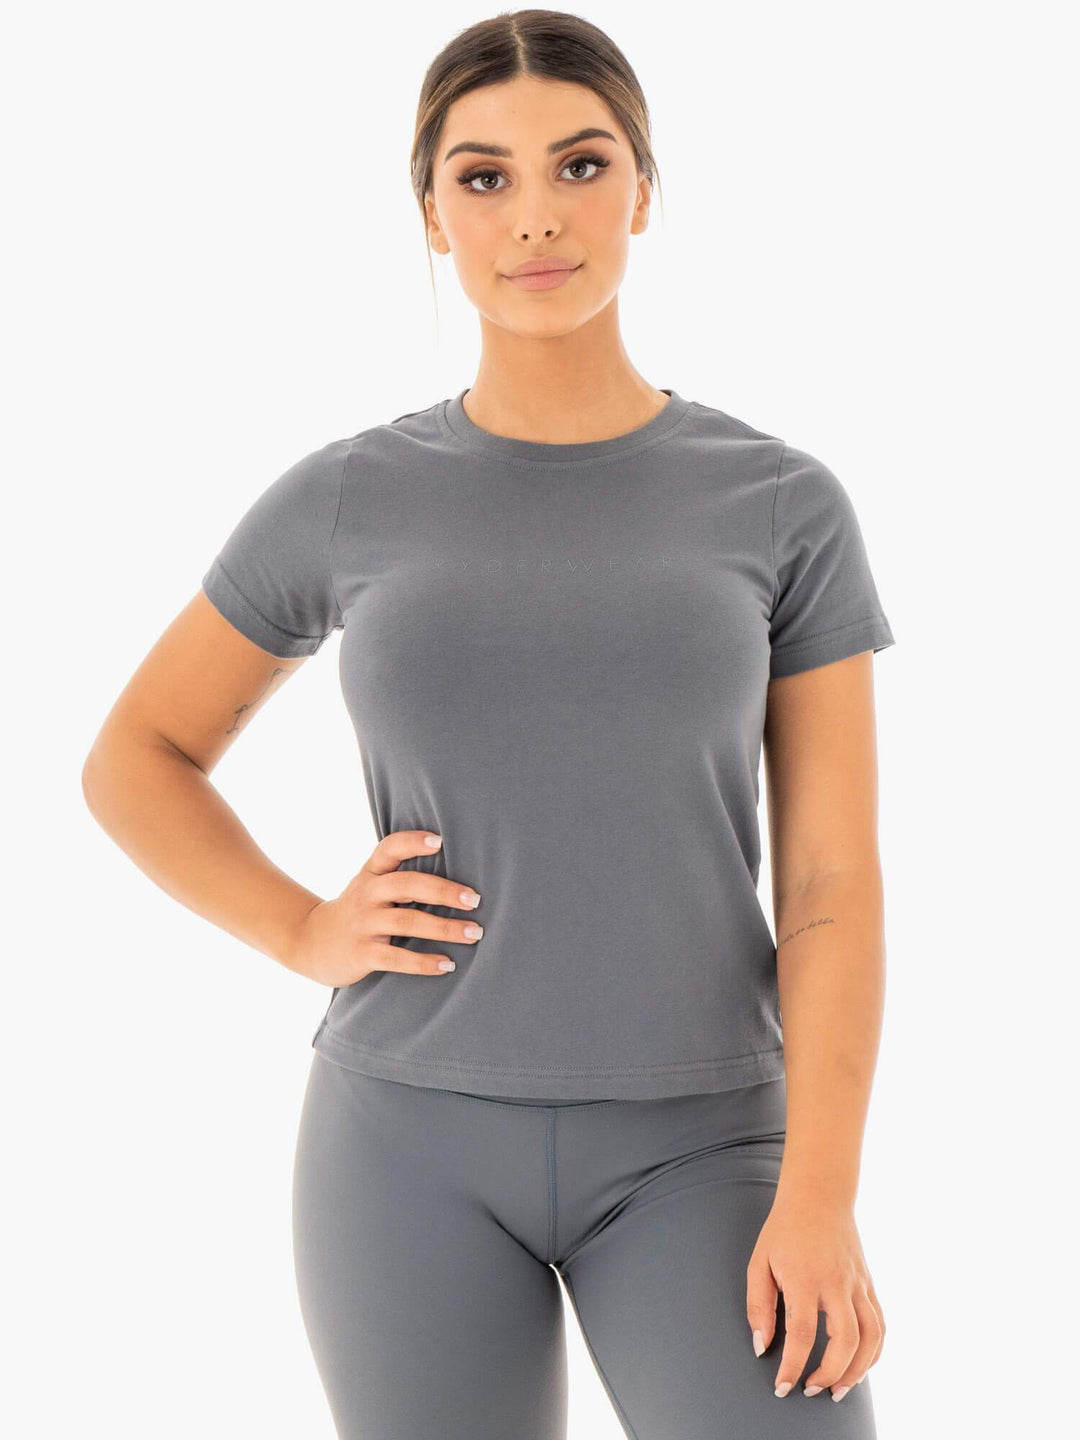 Motion T-Shirt - Charcoal Clothing Ryderwear 